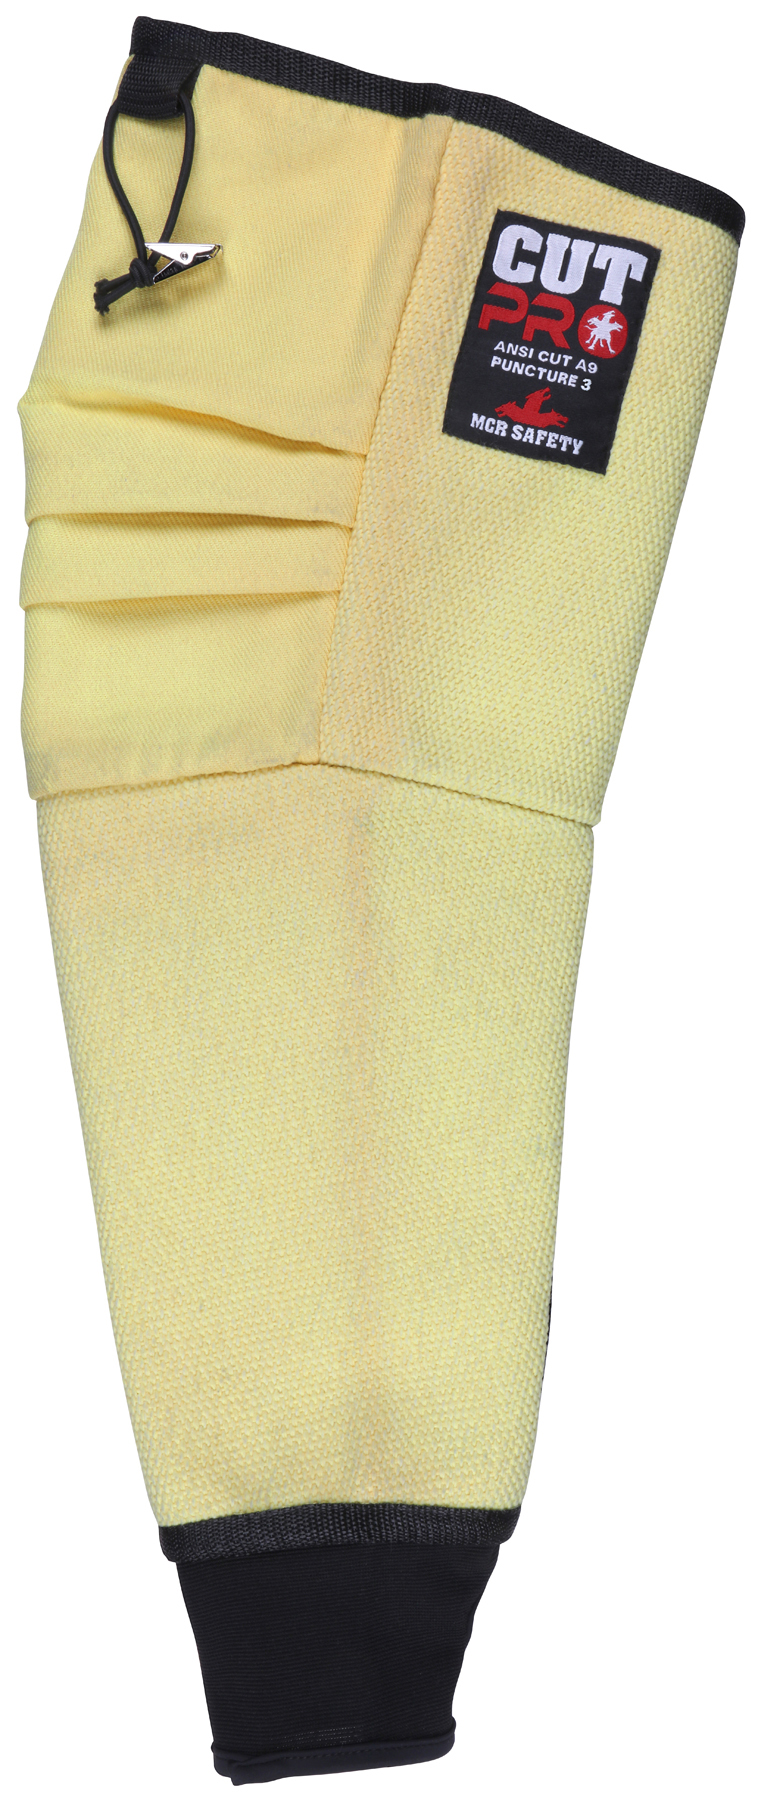 New Woven DuPont Kevlar with Cut Level A9 Protection Sleeve